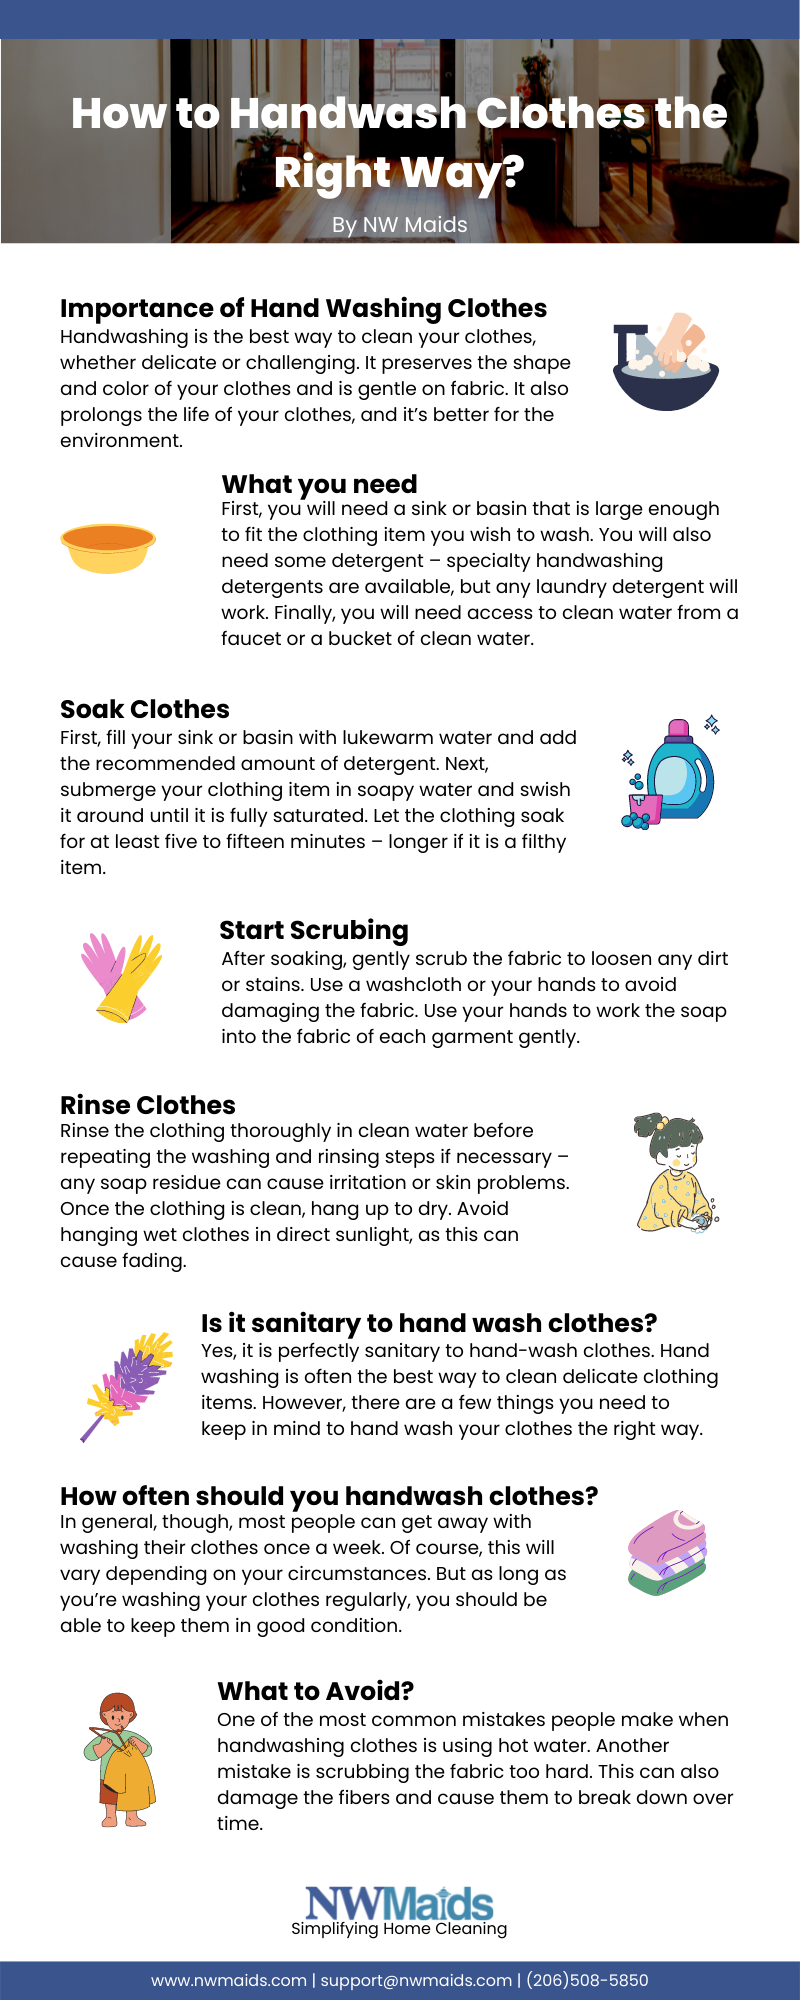 https://nwmaids.com/wp-content/uploads/2022/06/how-to-handwash-clothes-the-right-way.png